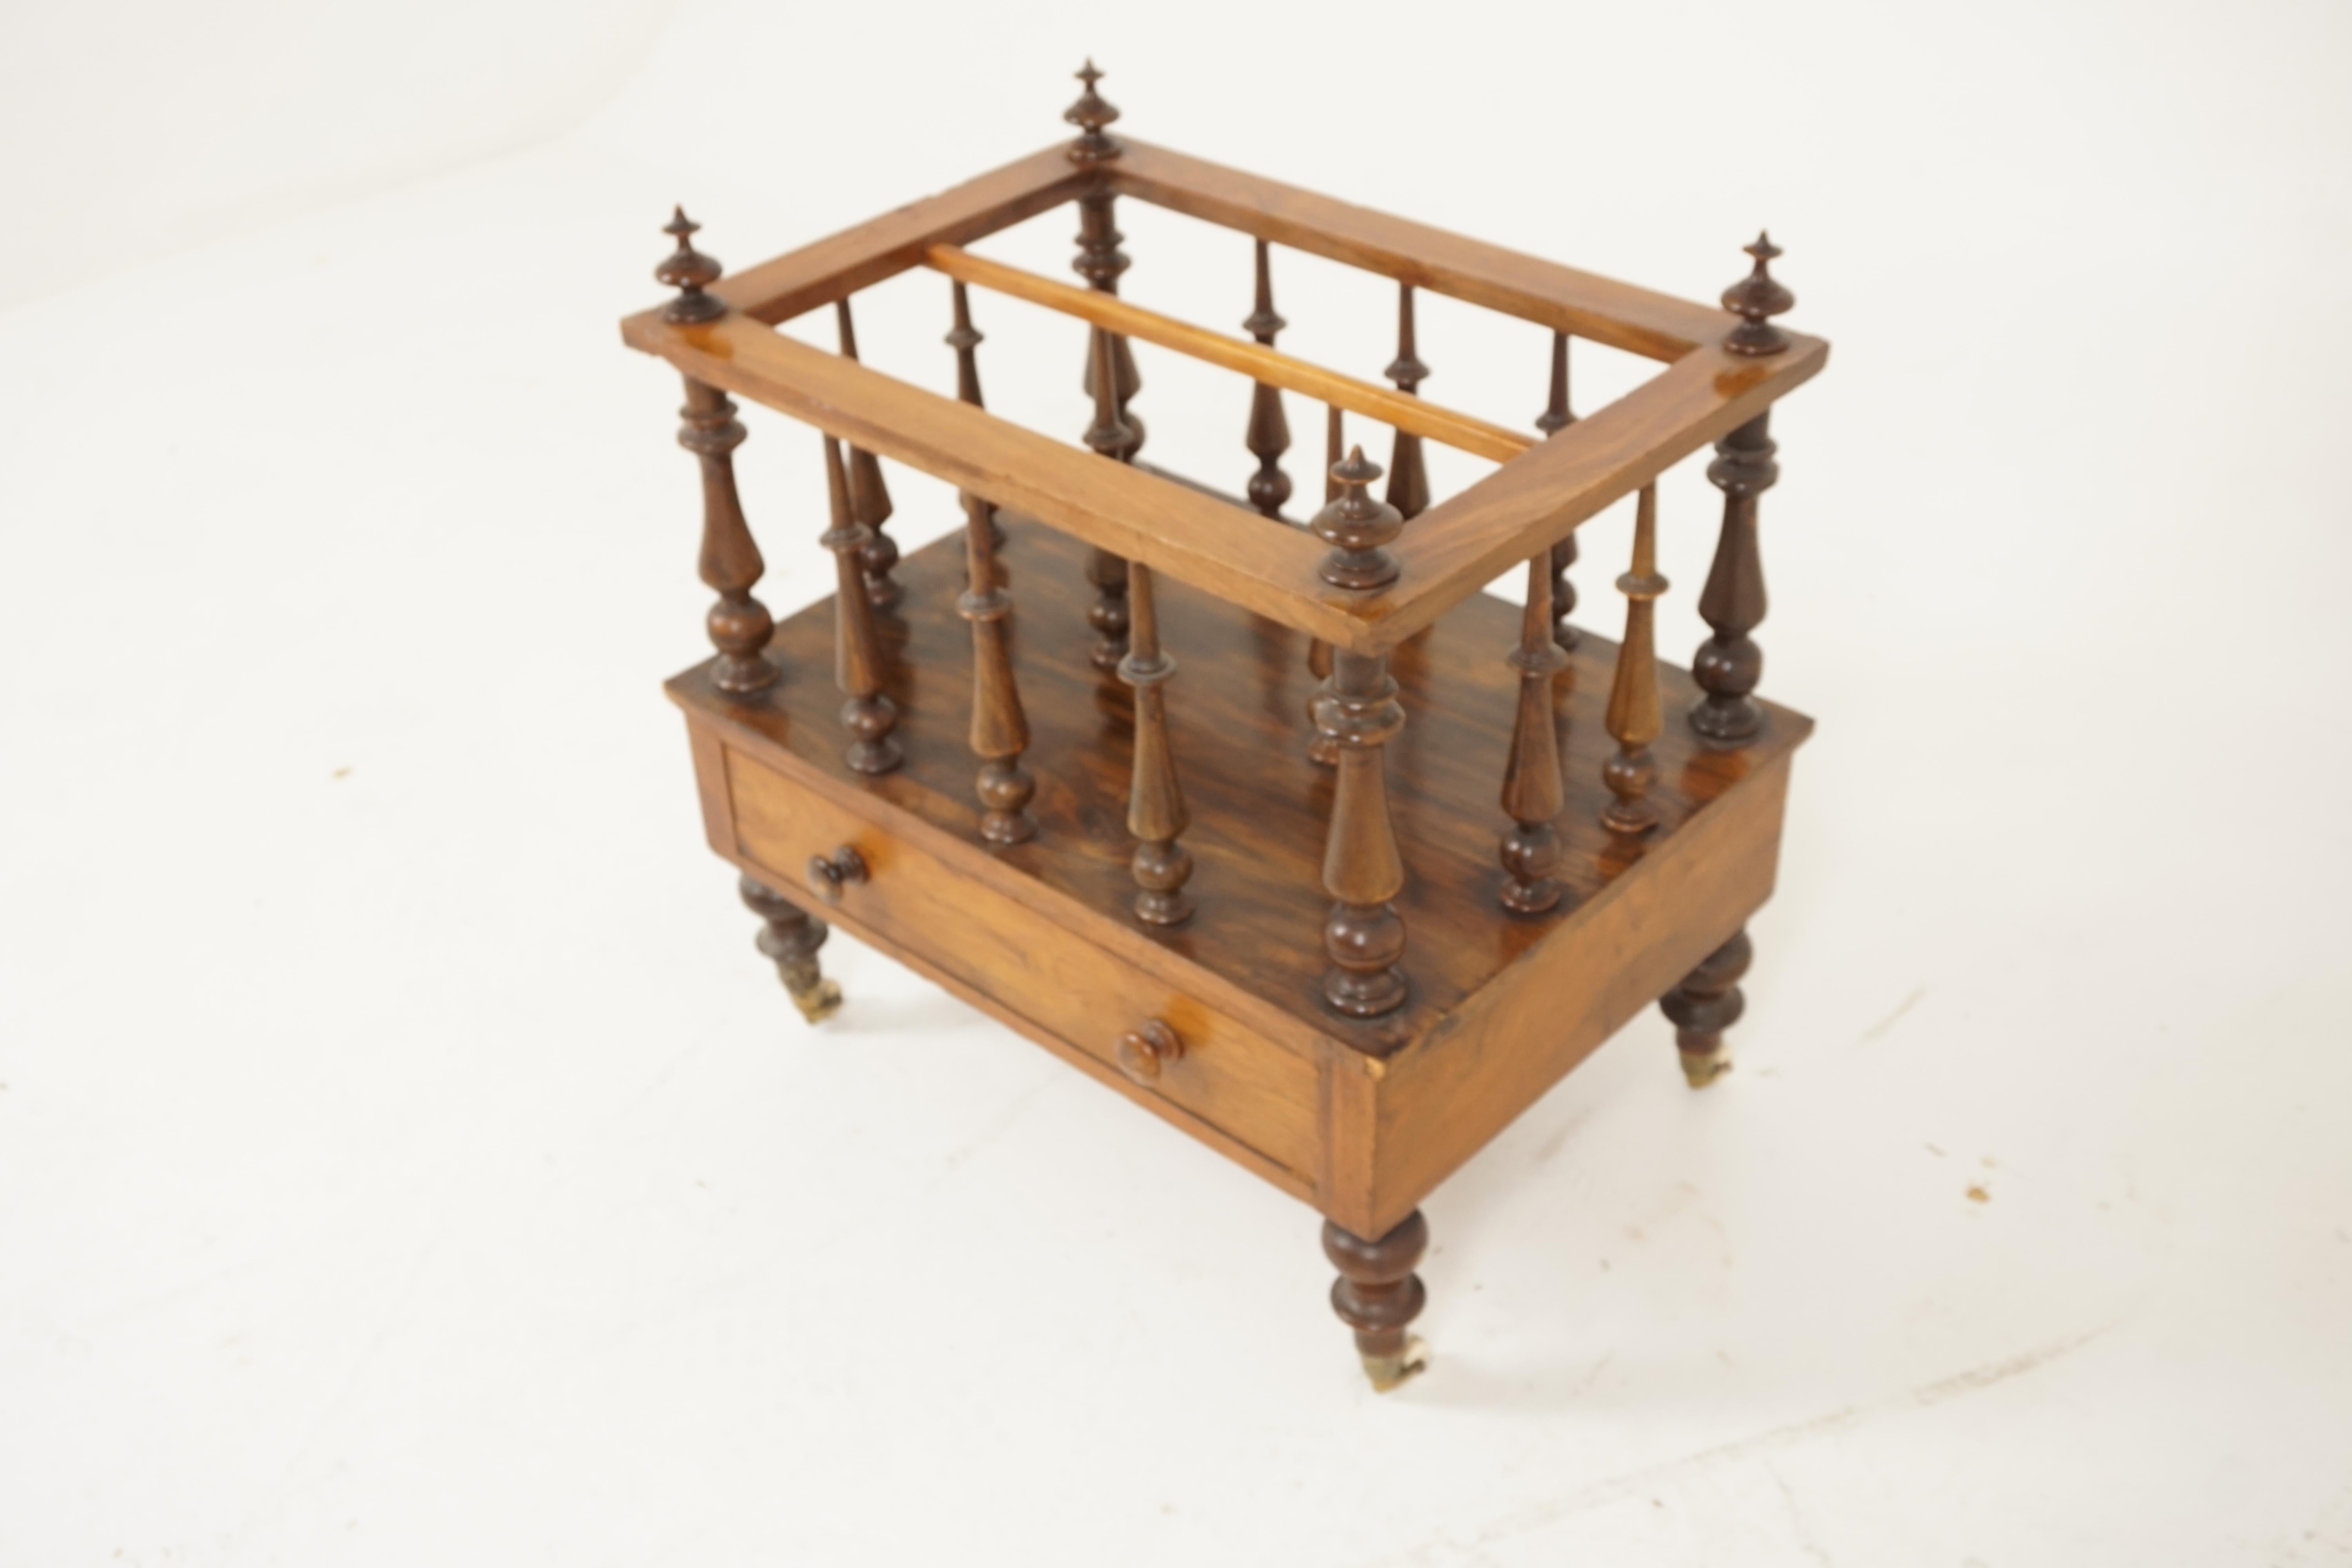 Antique Victorian Canterbury Music/Magazine rack, Wood, Scotland 1870, H316

Scotland 1870
Solid Wood + veneers
Original finish
Moulded top frame with uprights to each corner topped with pretty finials
Two division with turned spindles
Single drawer